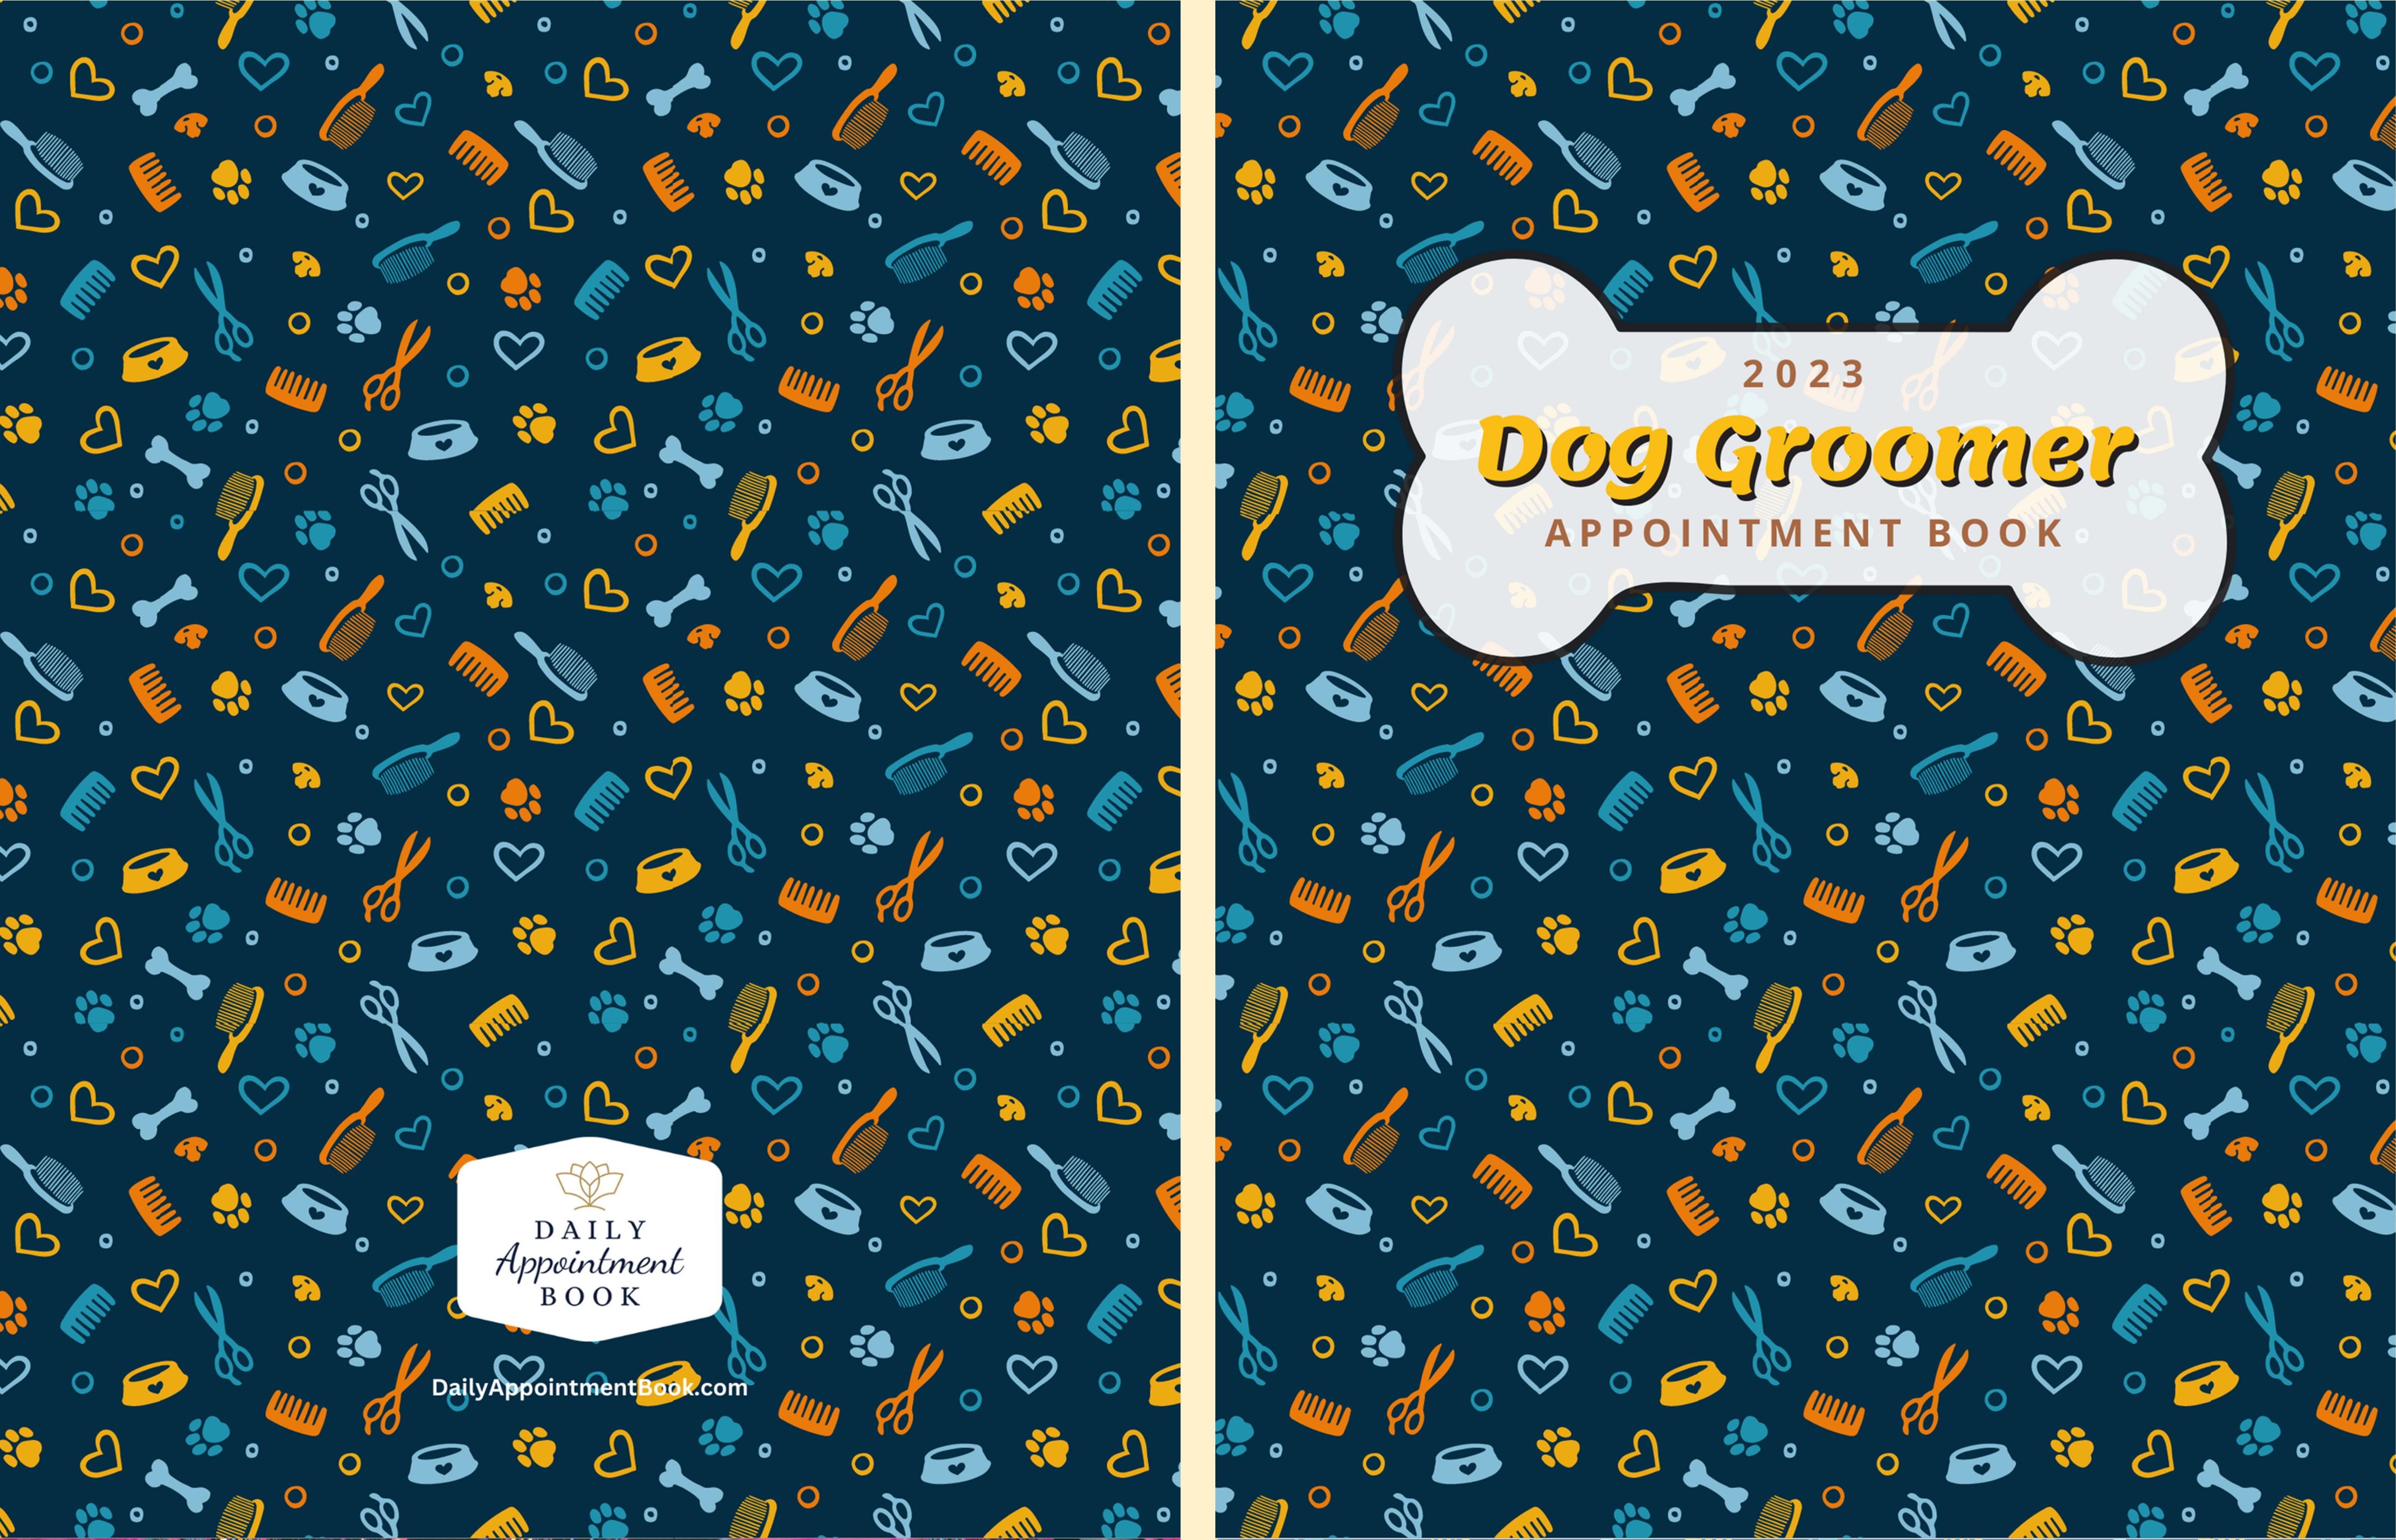 Dog Groomer Appointment Book 2023 Dated: Daily Planner with 15-minute time slots for Dog Grooming with Expense Journal & Income Tracker cover image